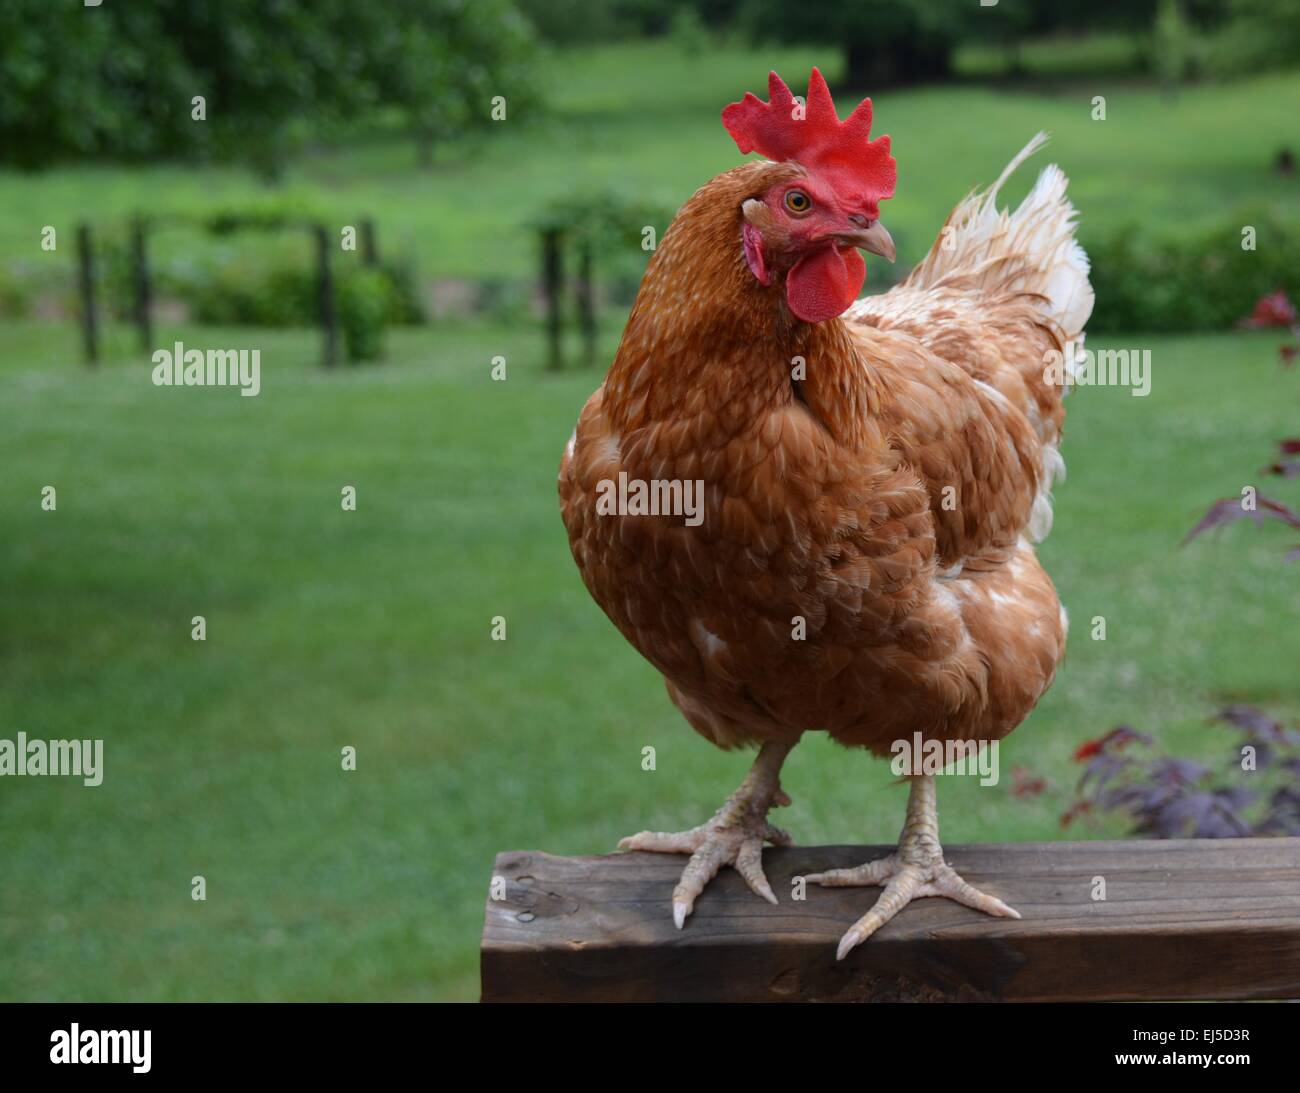 Laying Free Range Chicken, Hen, Poultry. Chicken enjoying the outdoor sunshine and green grass. Stock Photo